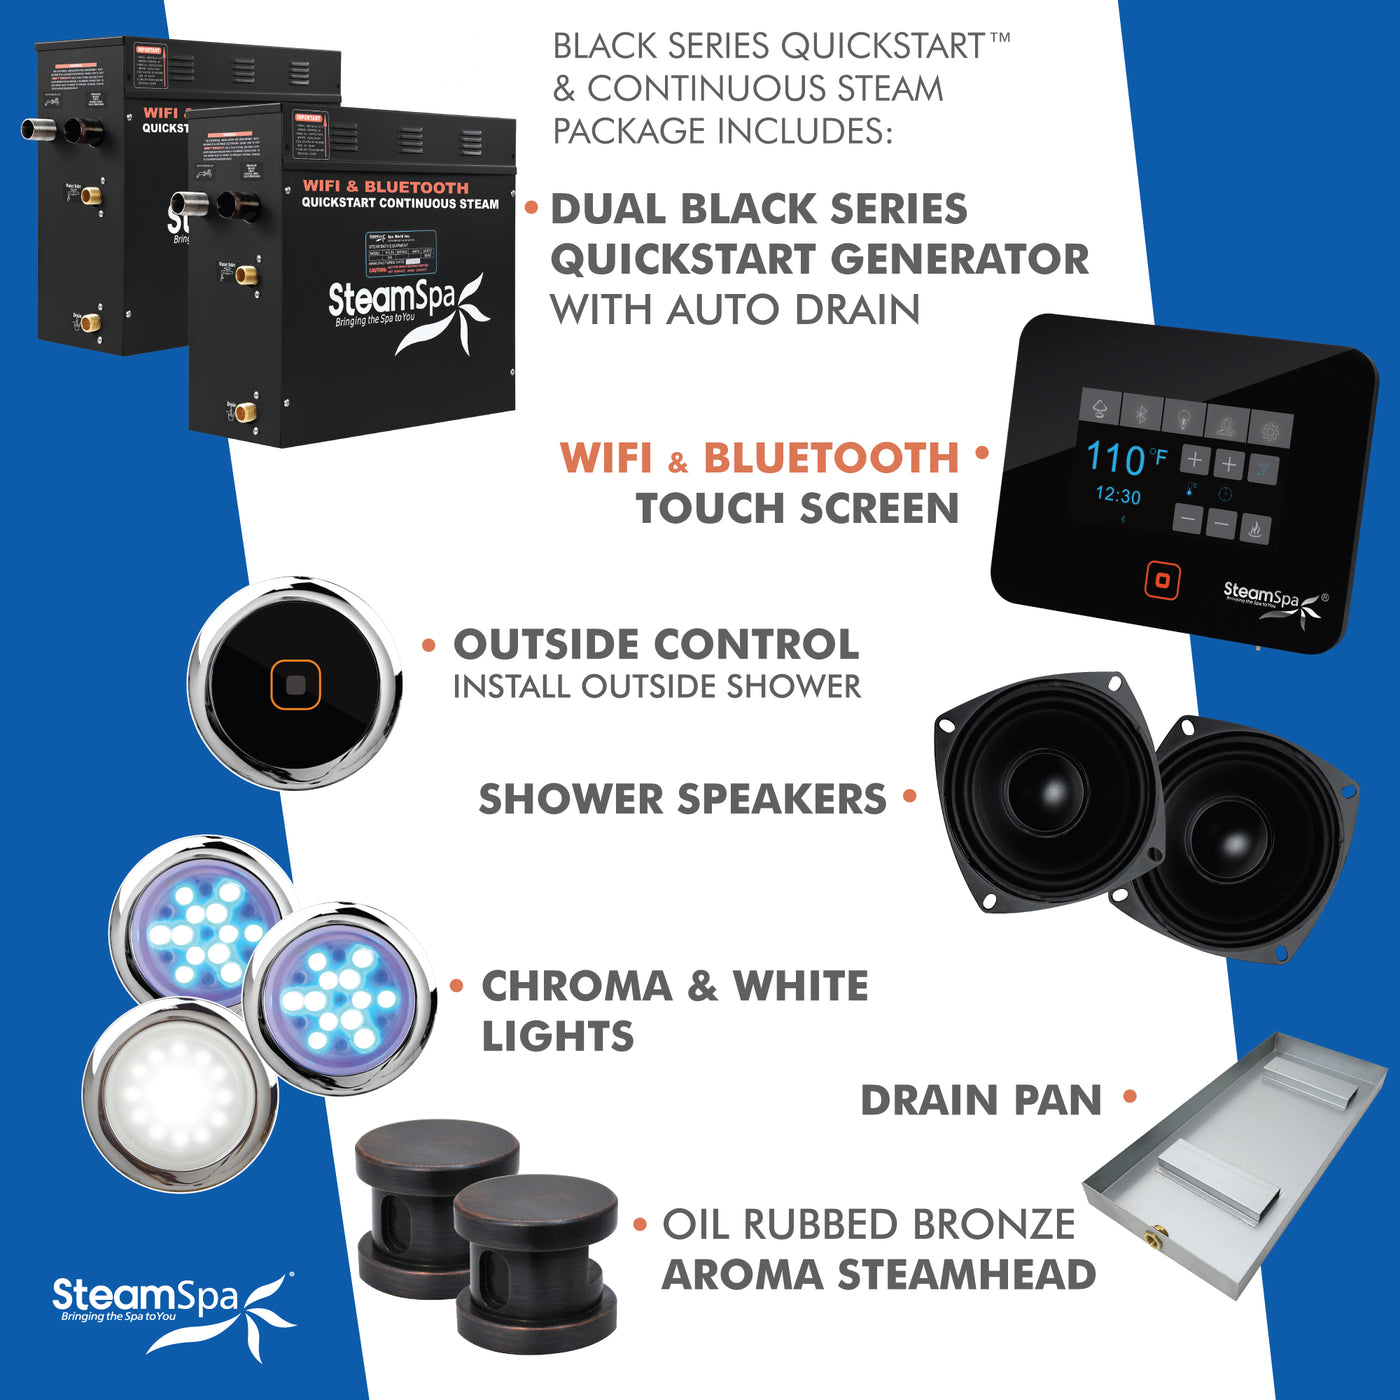 Black Series WiFi and Bluetooth 2 x 9kW QuickStart Steam Bath Generator Package w/ Dual Aroma Pump in Oil Rubbed Bronze BKT1800ORB-ADP